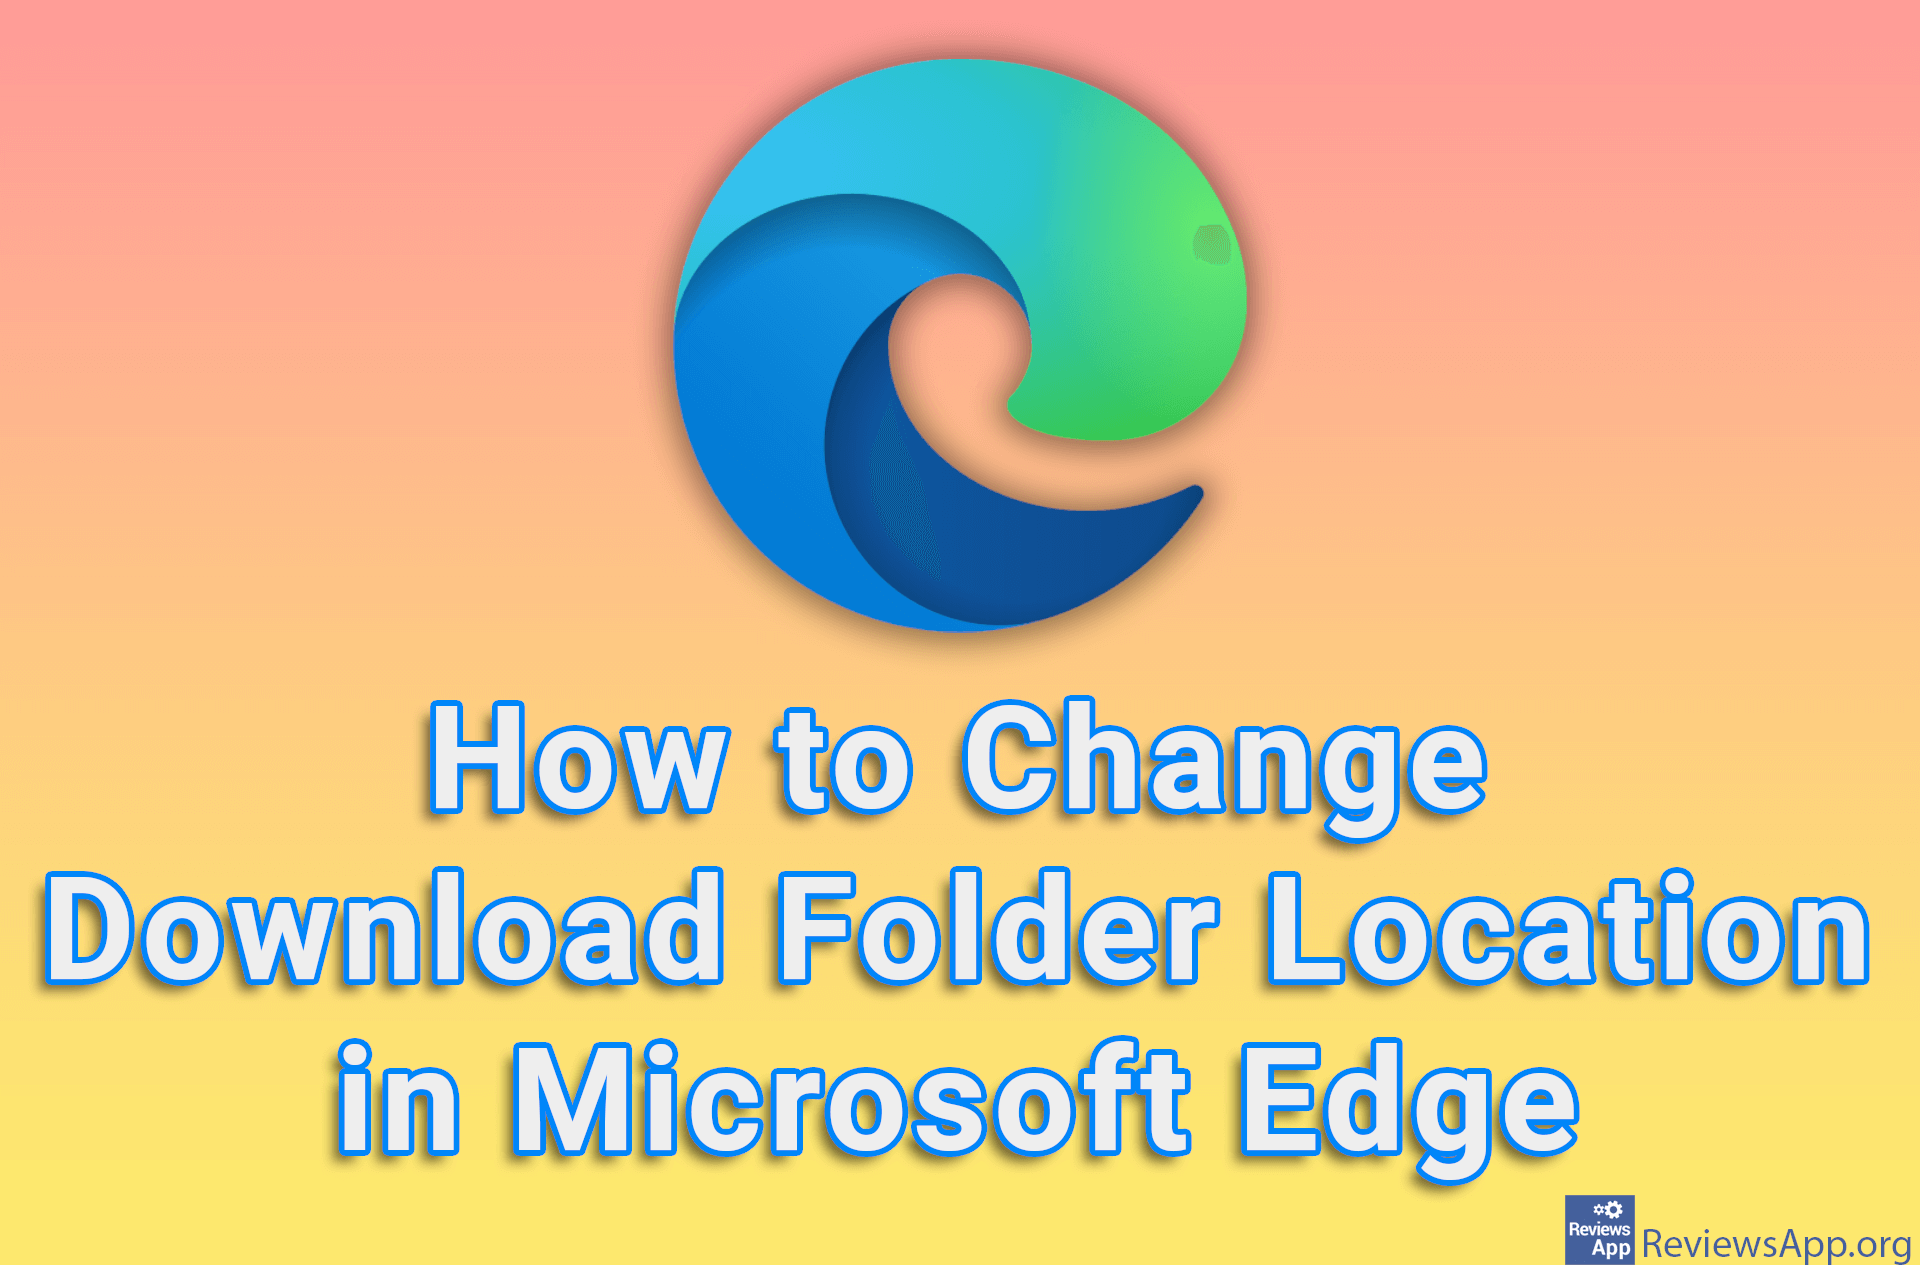 How to Change Download Folder Location in Microsoft Edge